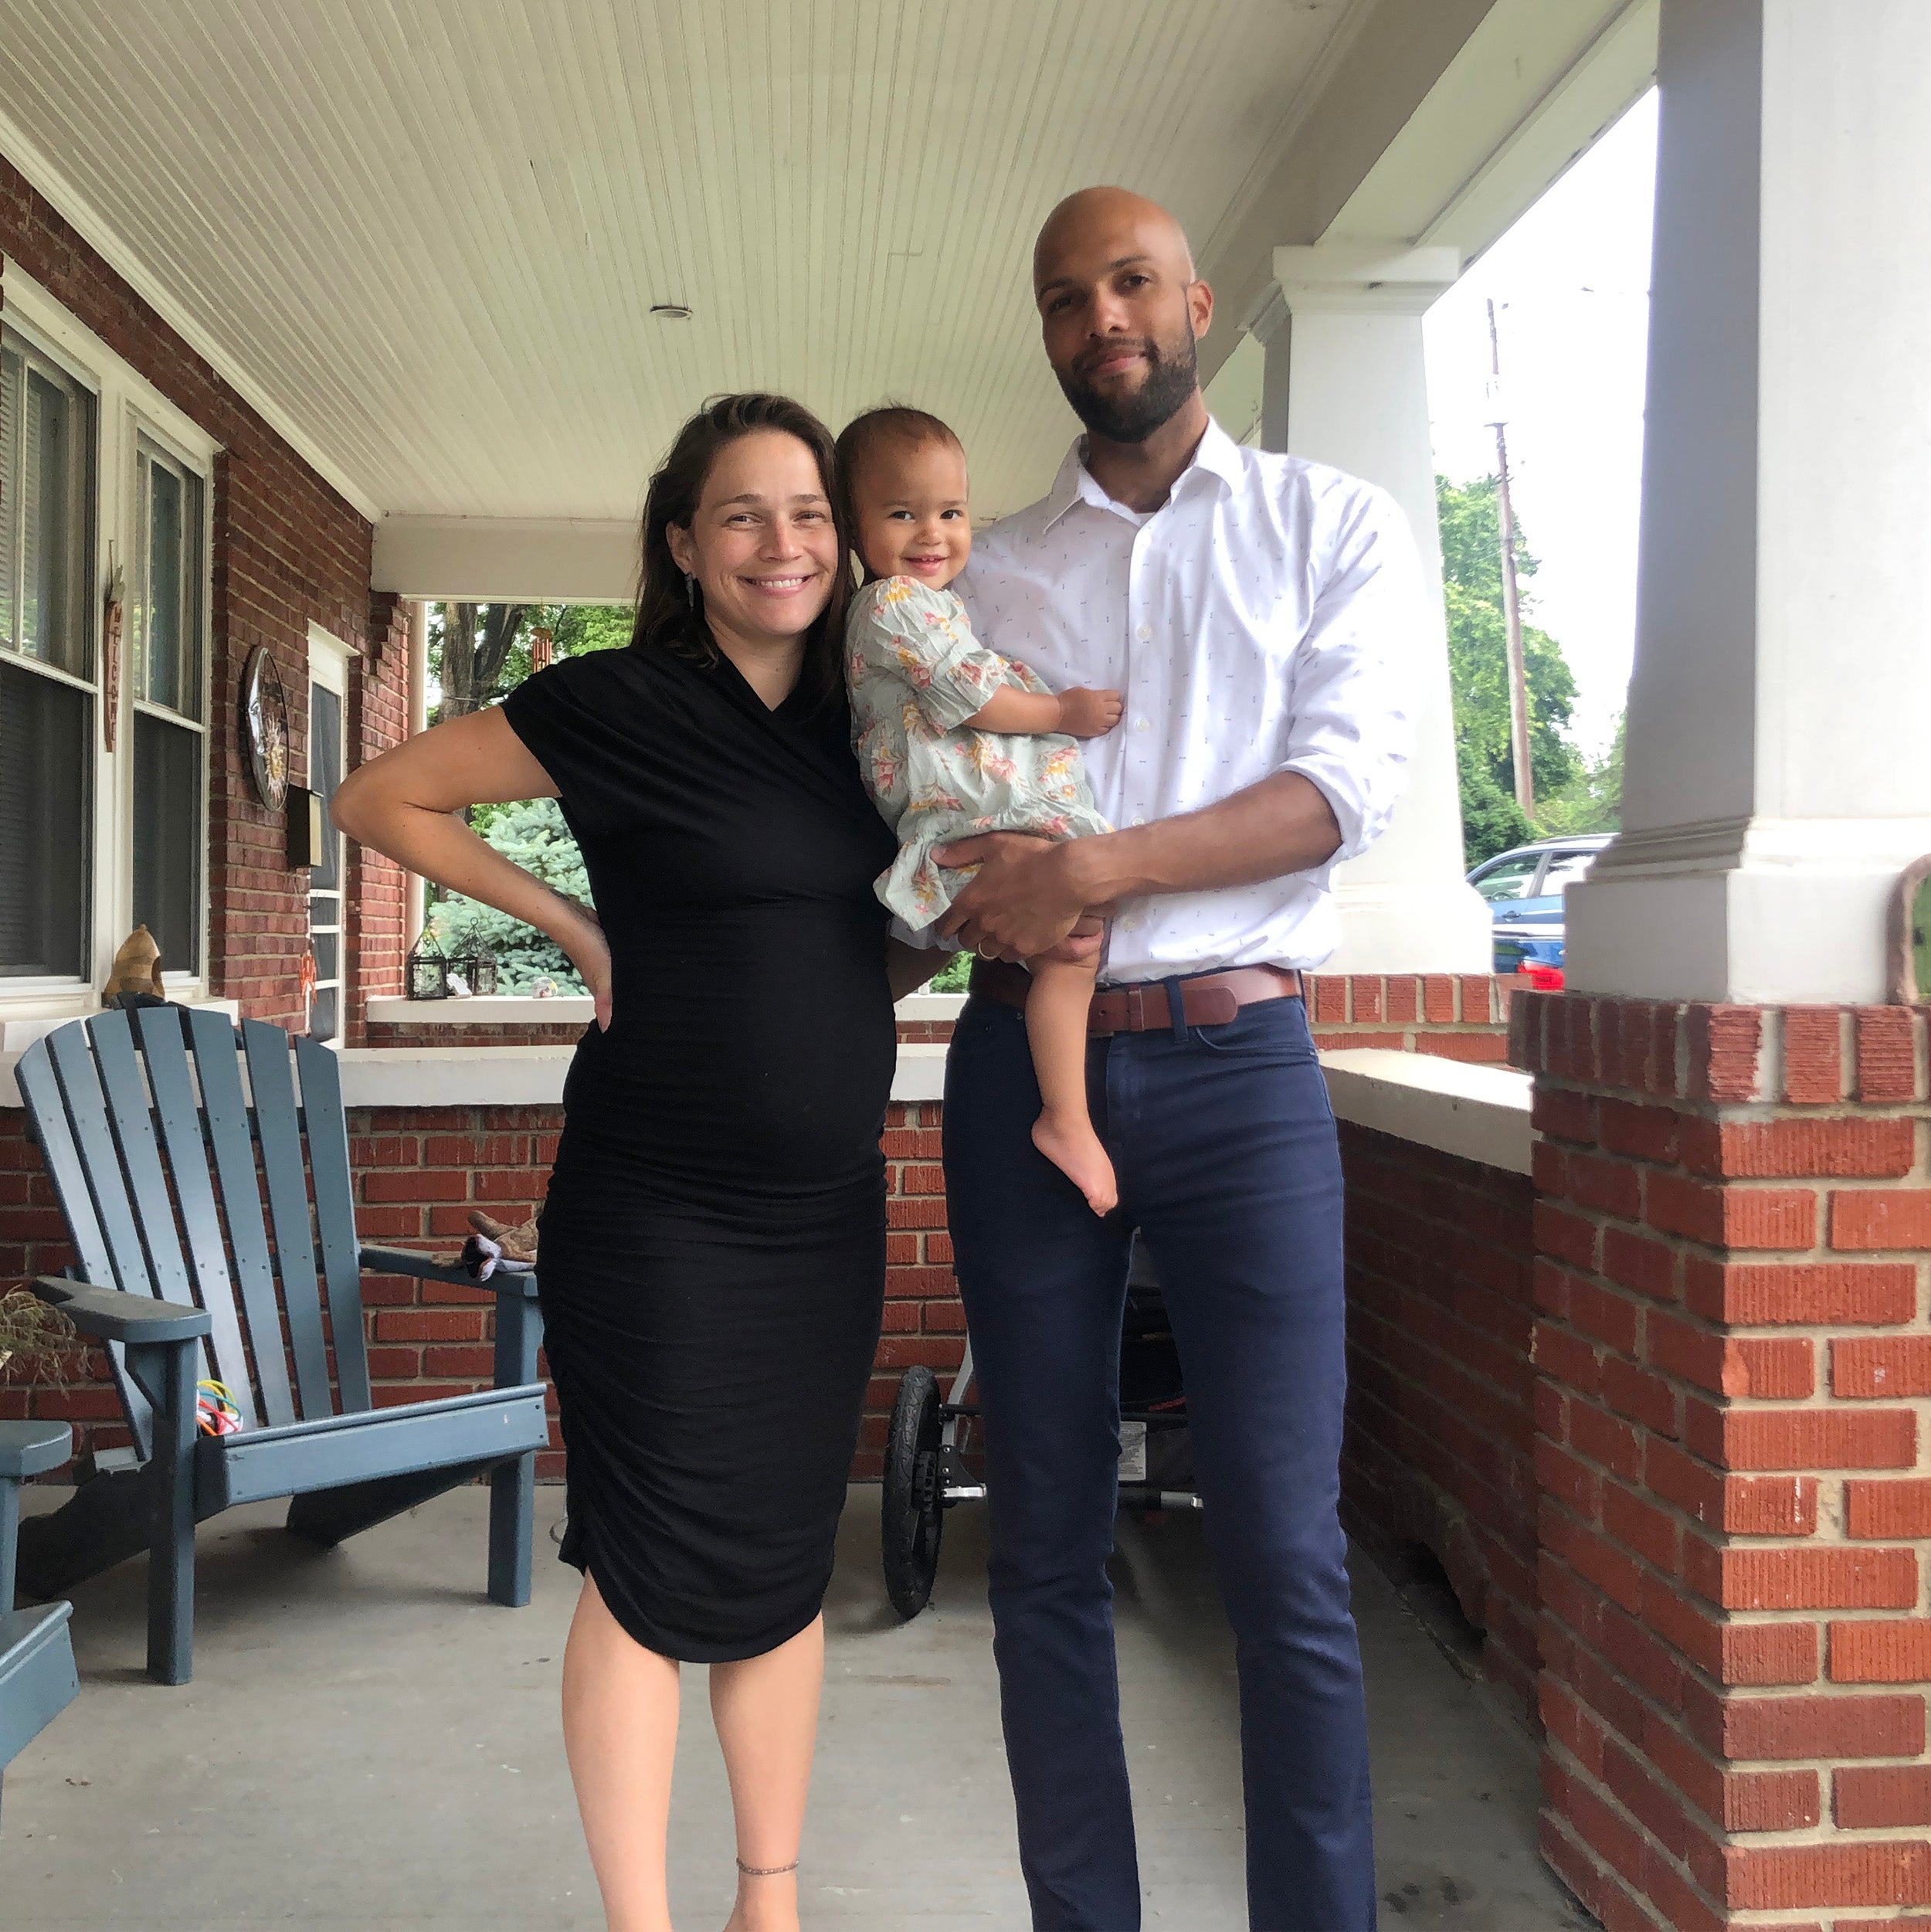 A woman in a black dress standing on a porch with a man in a white shirt holding a baby